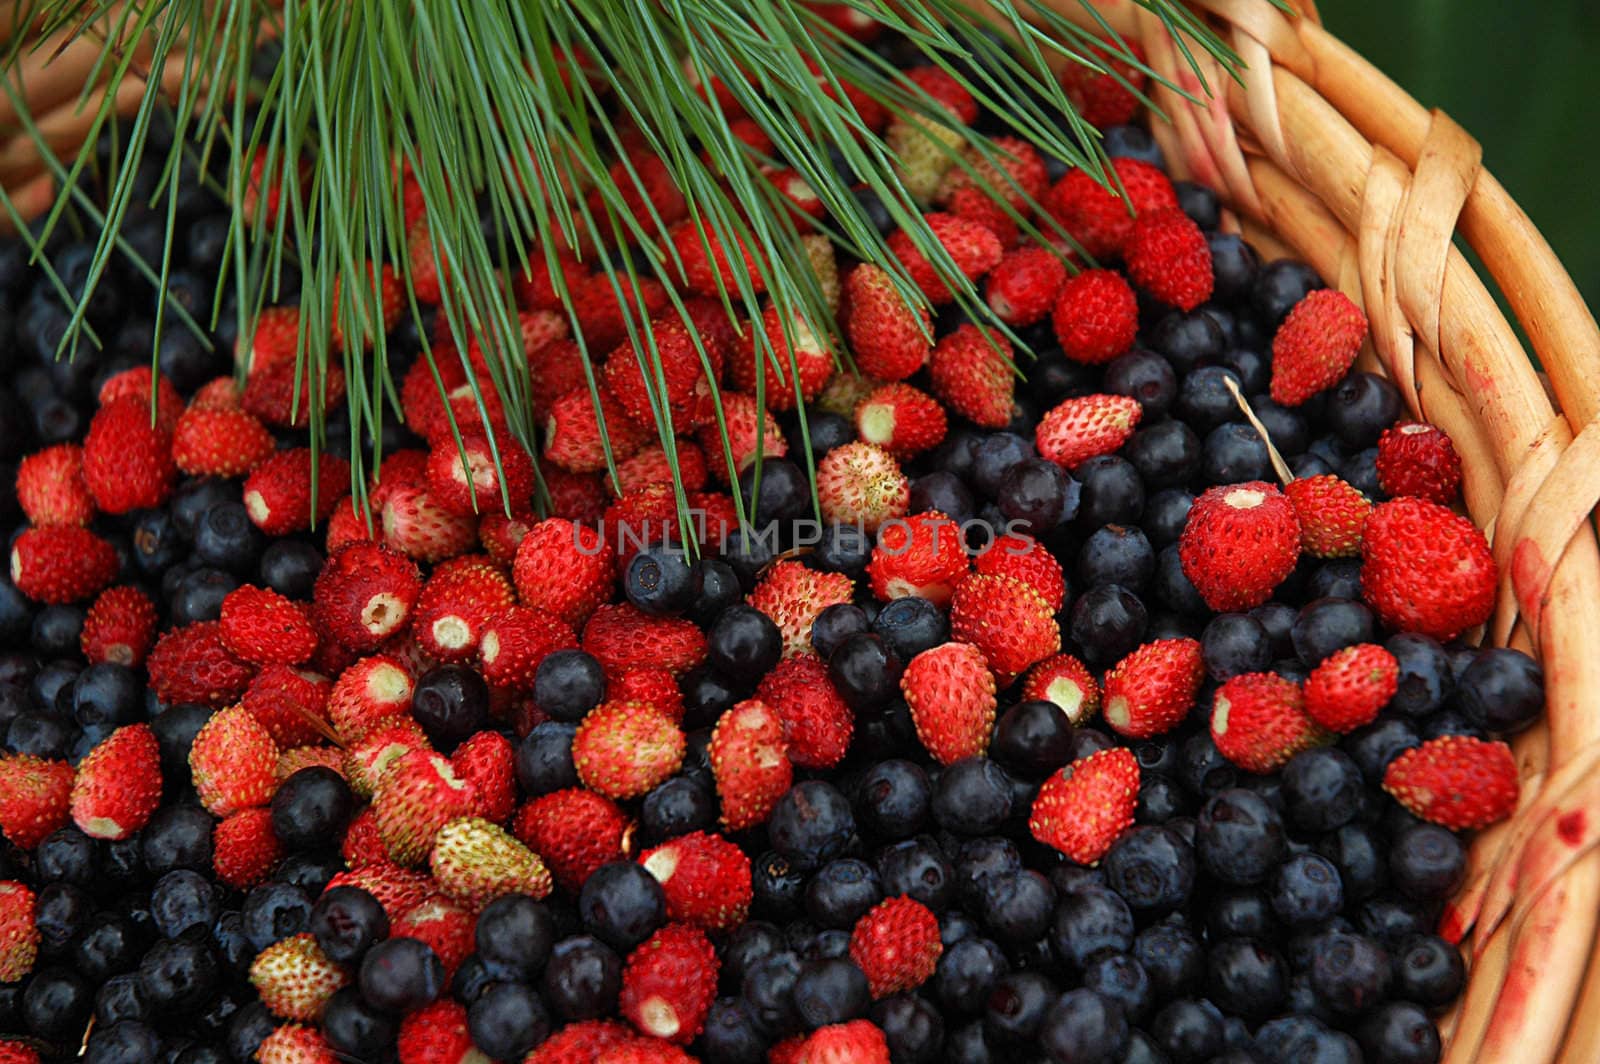 wild strawberry and a bilberry by OlgaDrozd